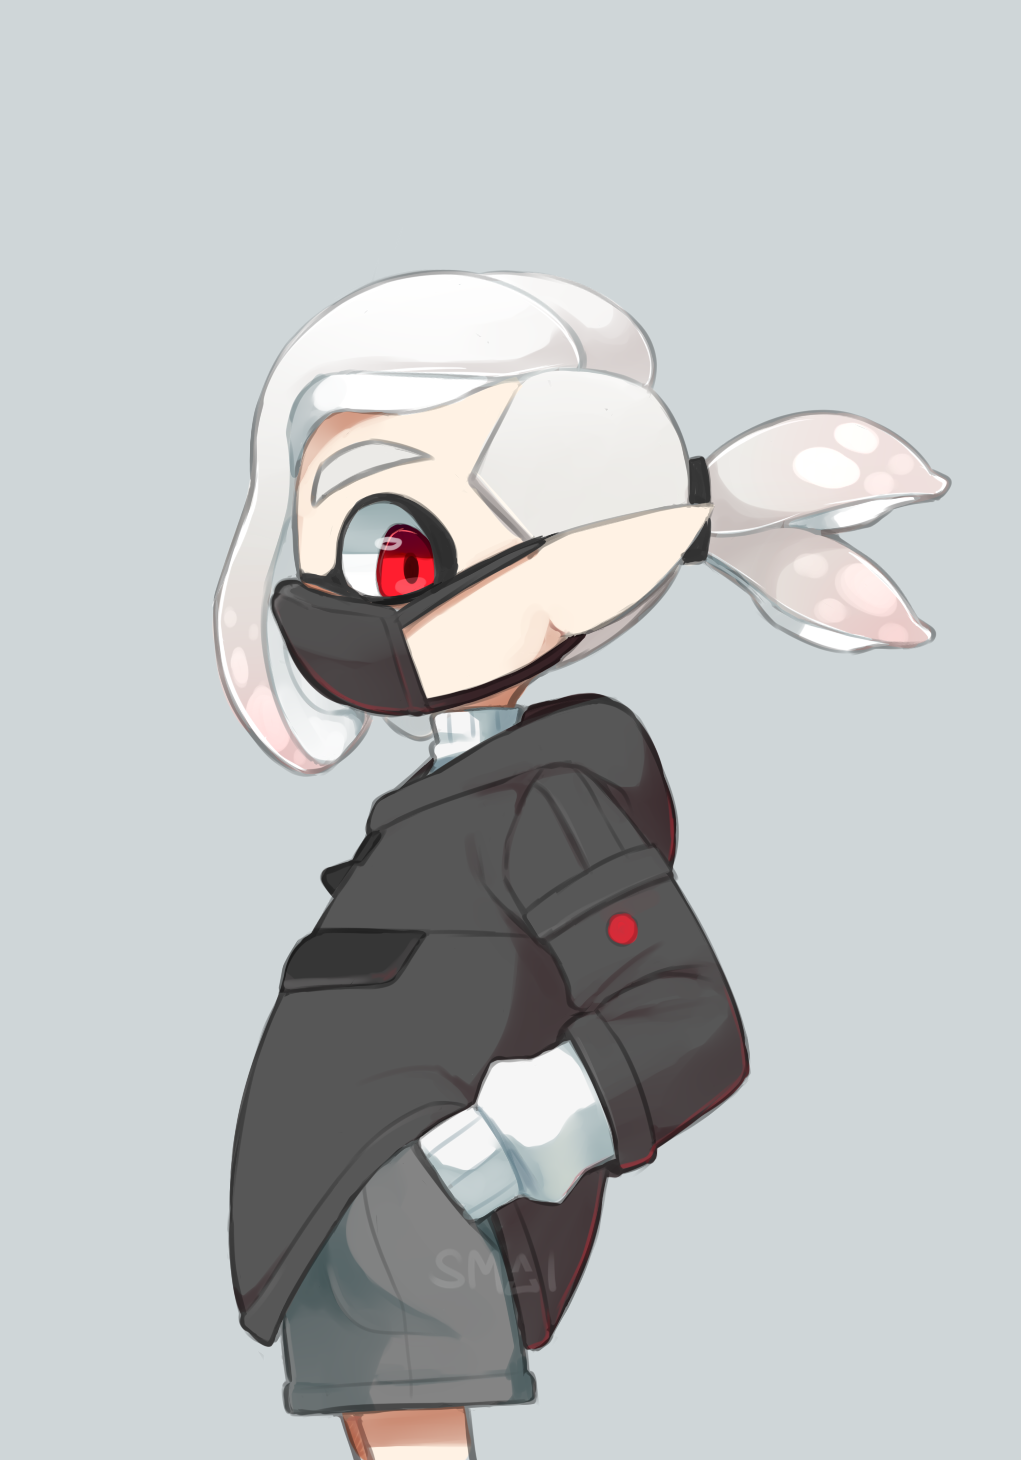 Splatoon But Anime by Mcpearly on DeviantArt